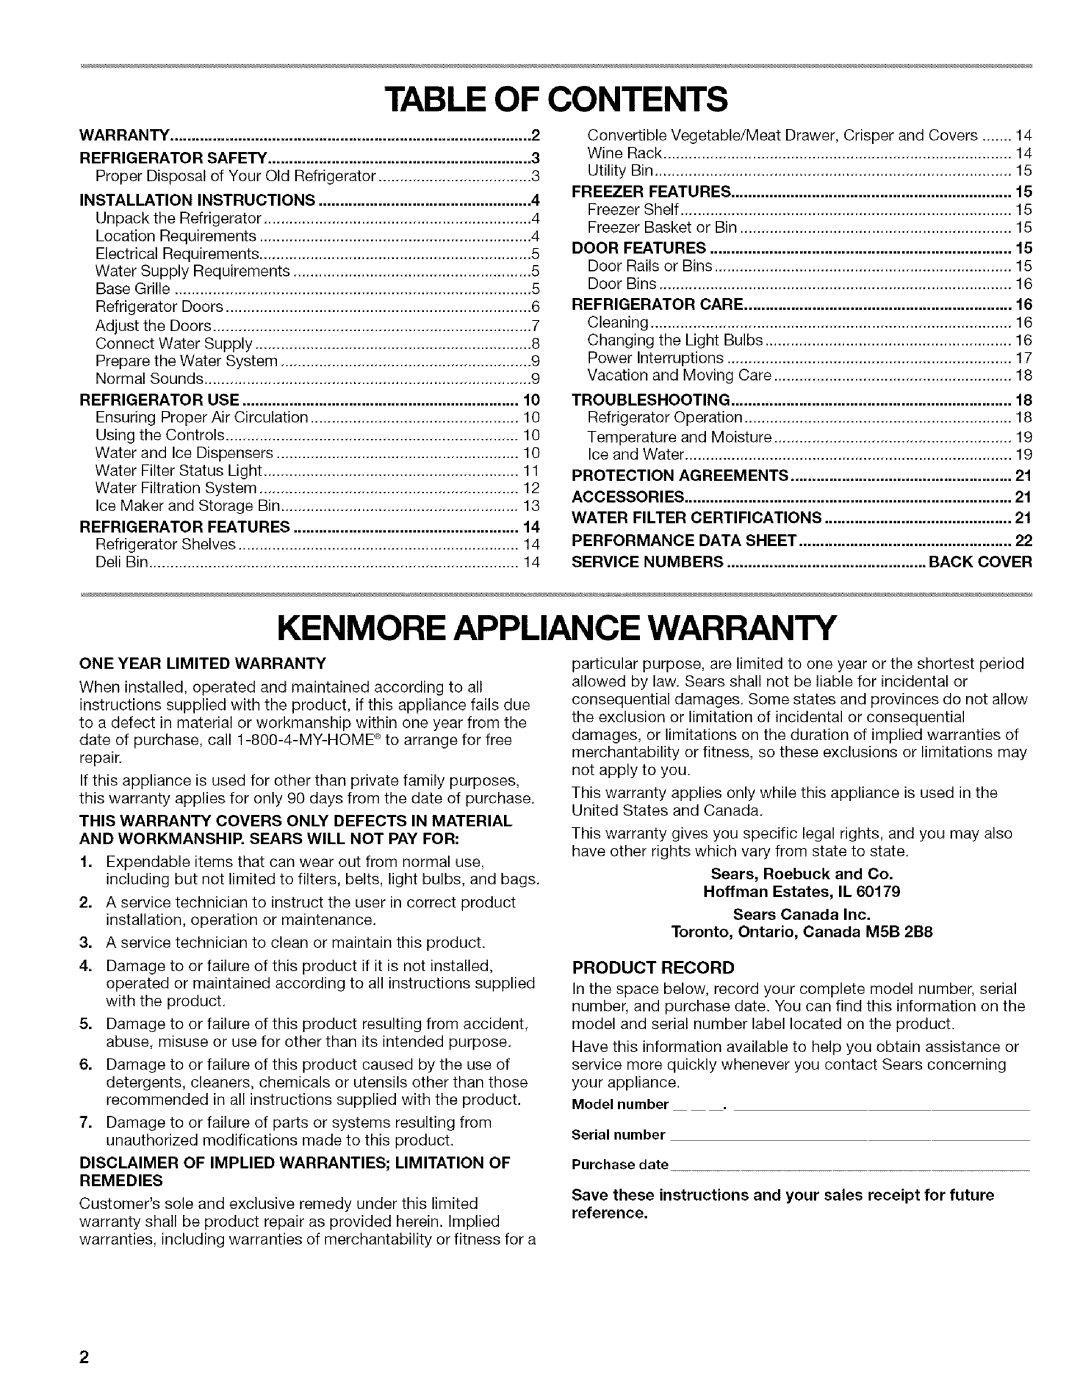 Kenmore WIOI67097A manual Table Of Contents, Kenmore Appliance Warranty, Refrigerator, Freezer, Protection, Performance 